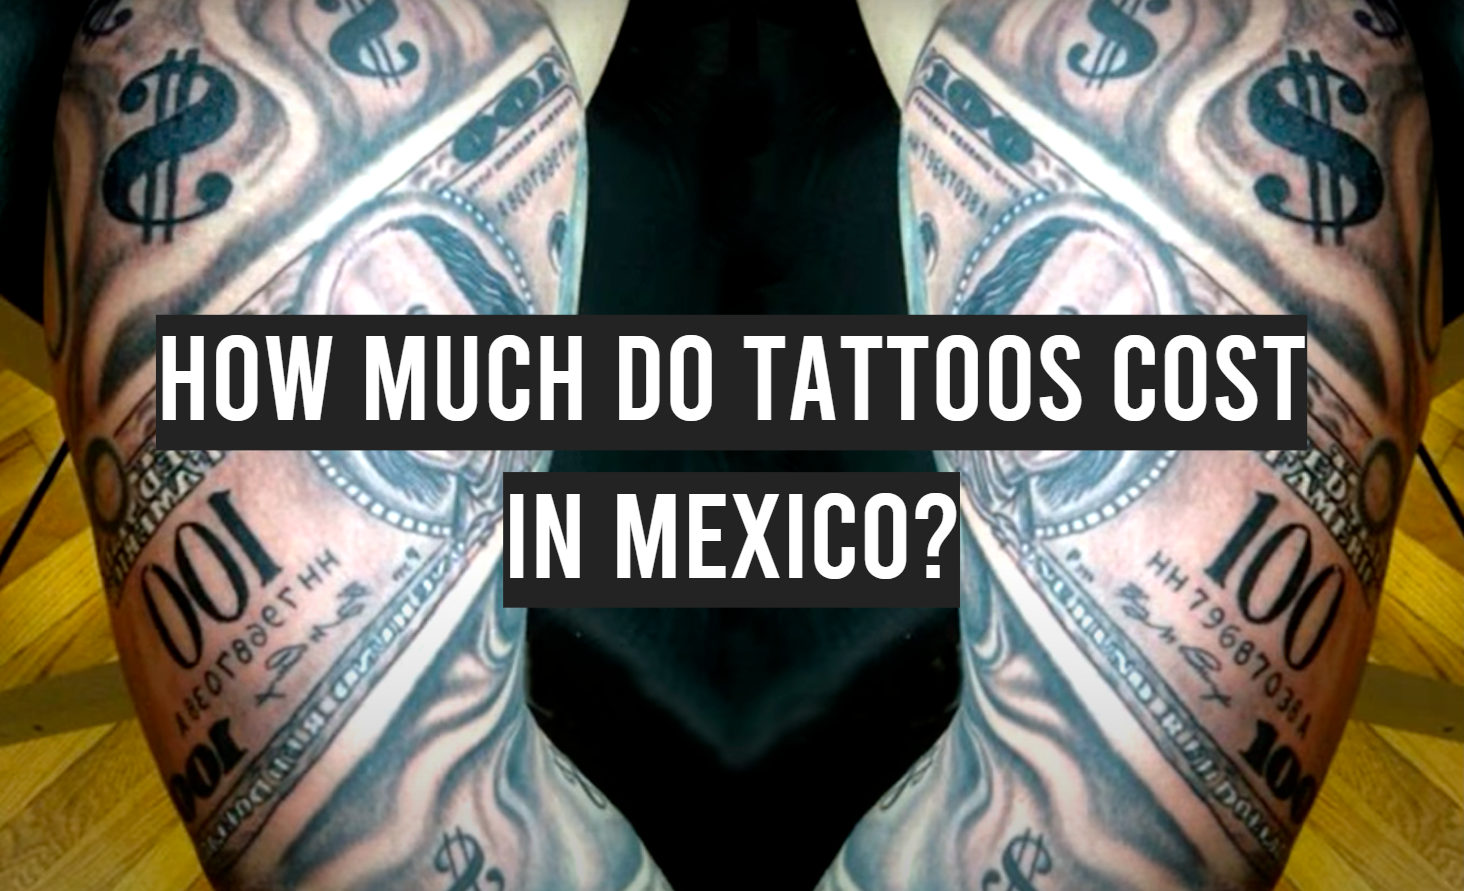 How much does a tattoo cost in mexico